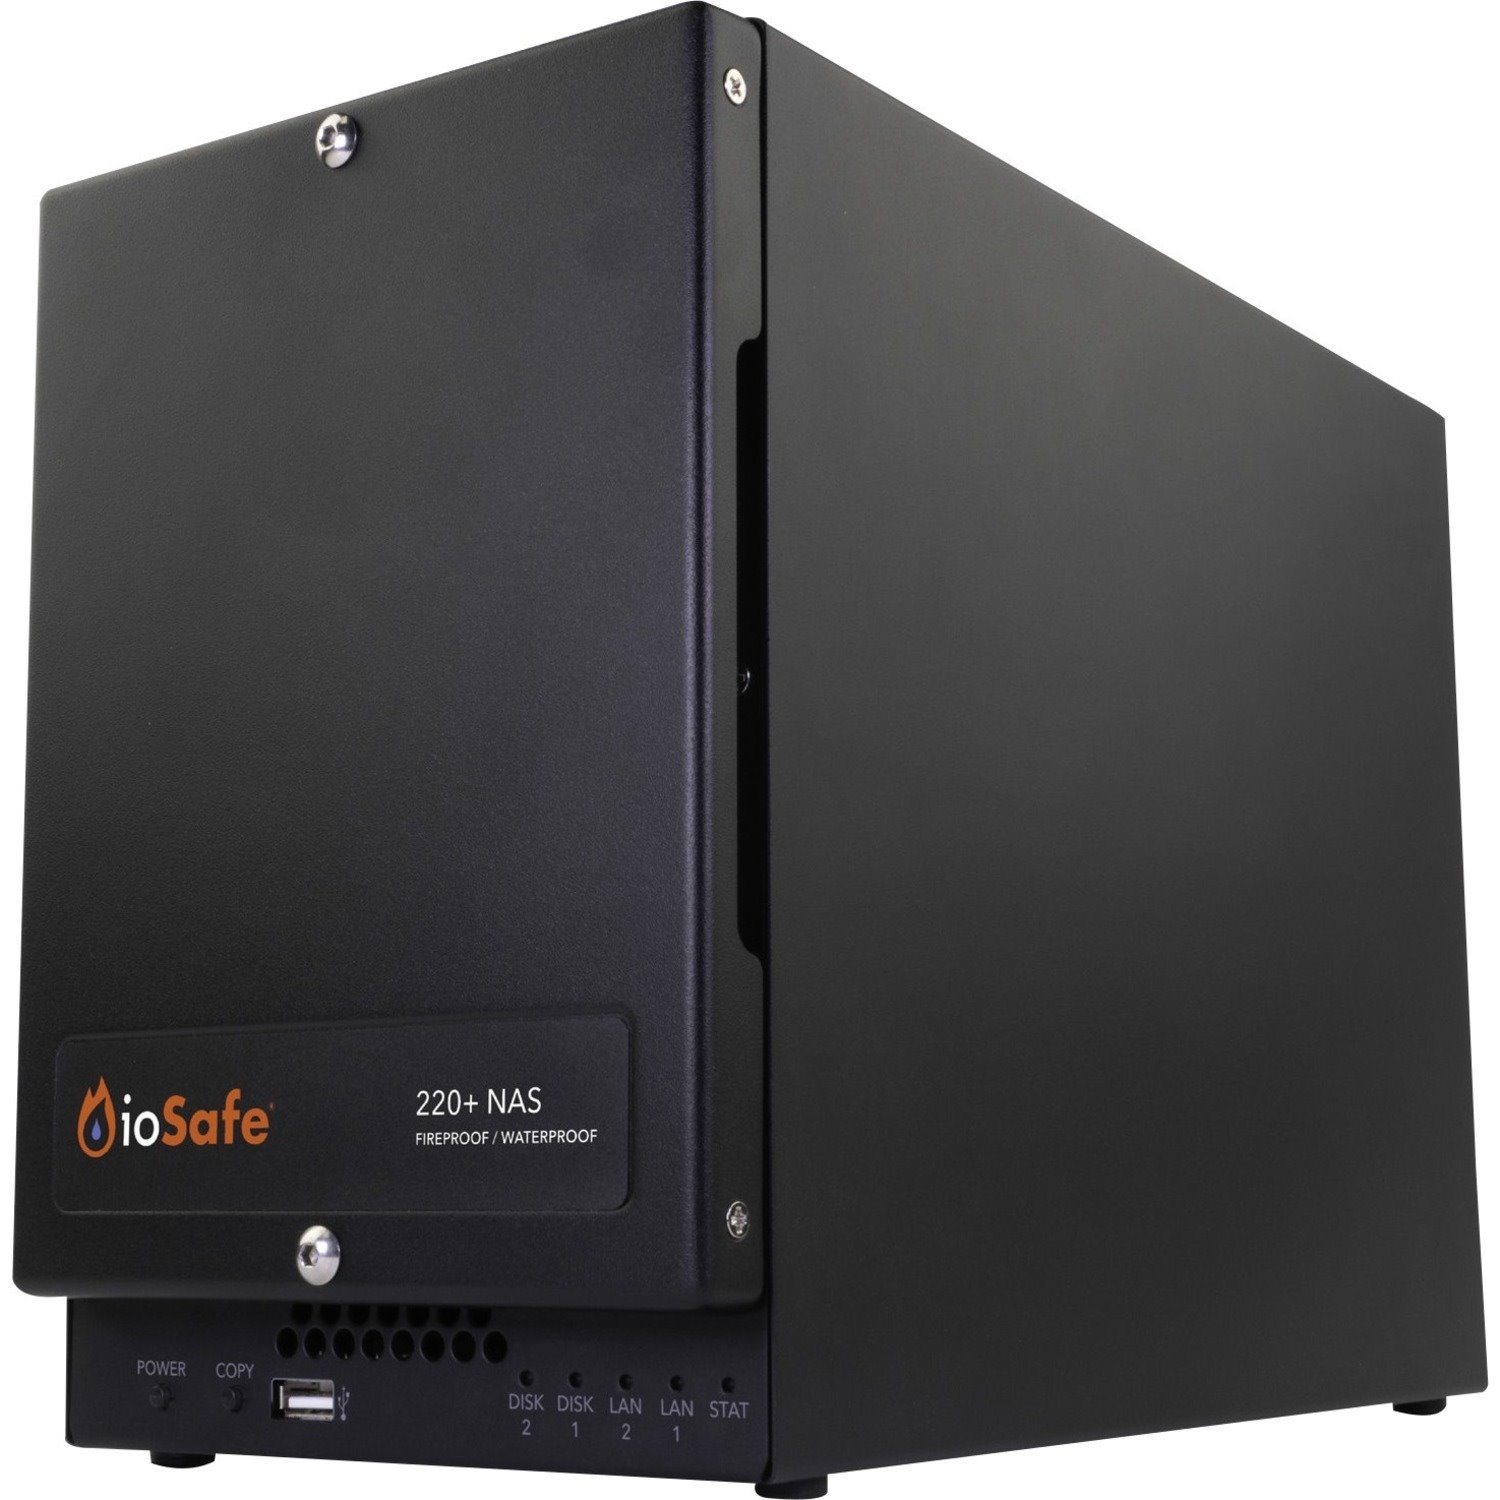 ioSafe Cru Acquisition Group 220+ Nas Fireproof/Waterproof 6TB 3TBX2 2YR DRS